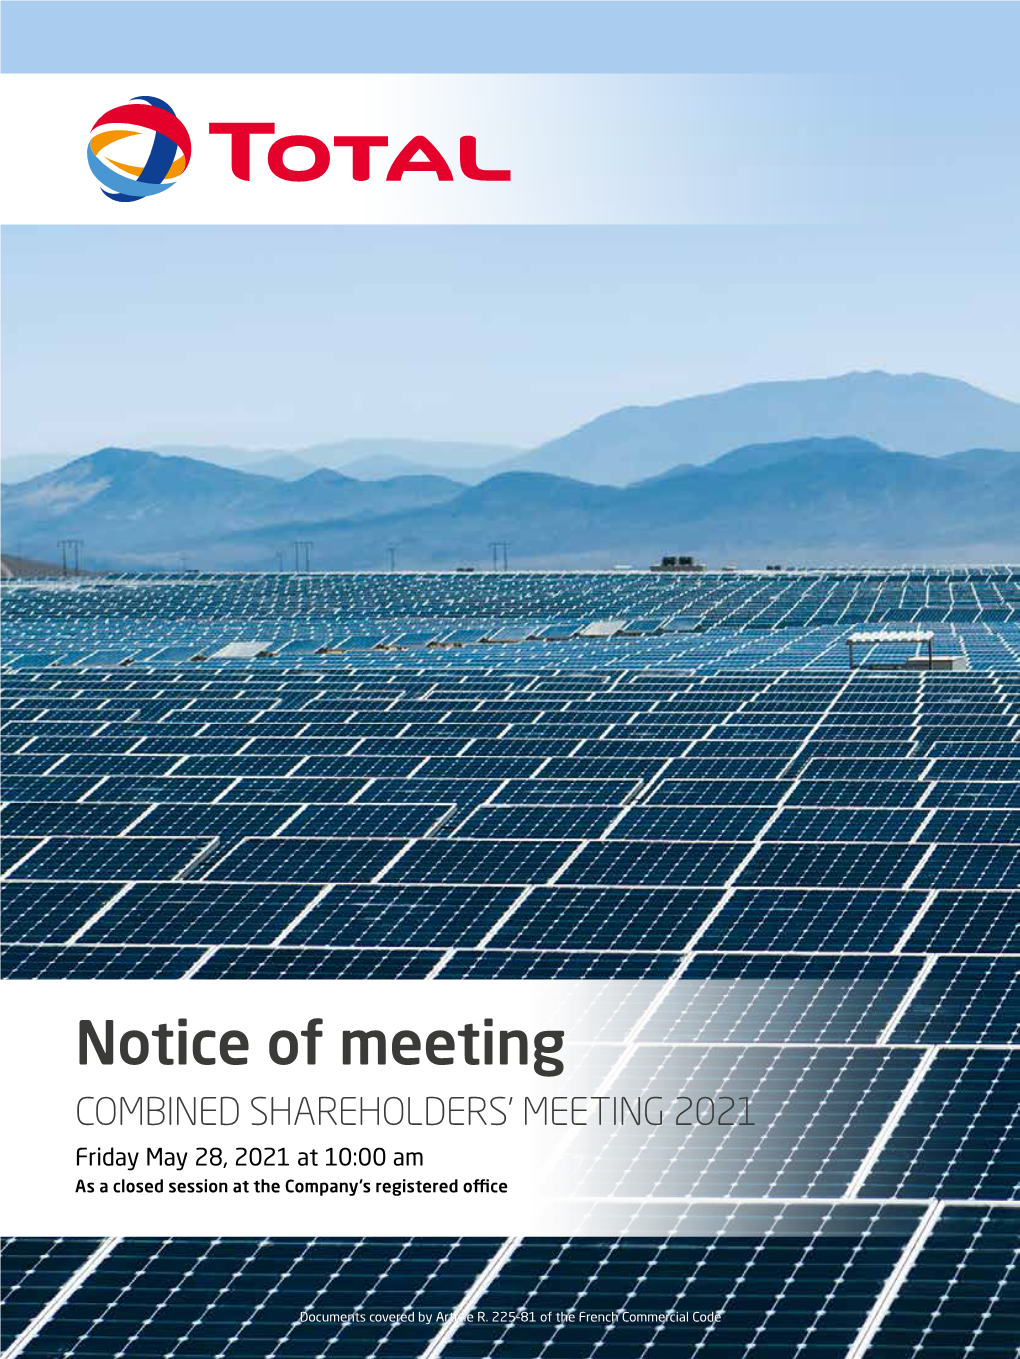 Notice of Meeting COMBINED SHAREHOLDERS' MEETING 2021 Friday May 28, 2021 at 10:00 Am As a Closed Session at the Company's Registered Office